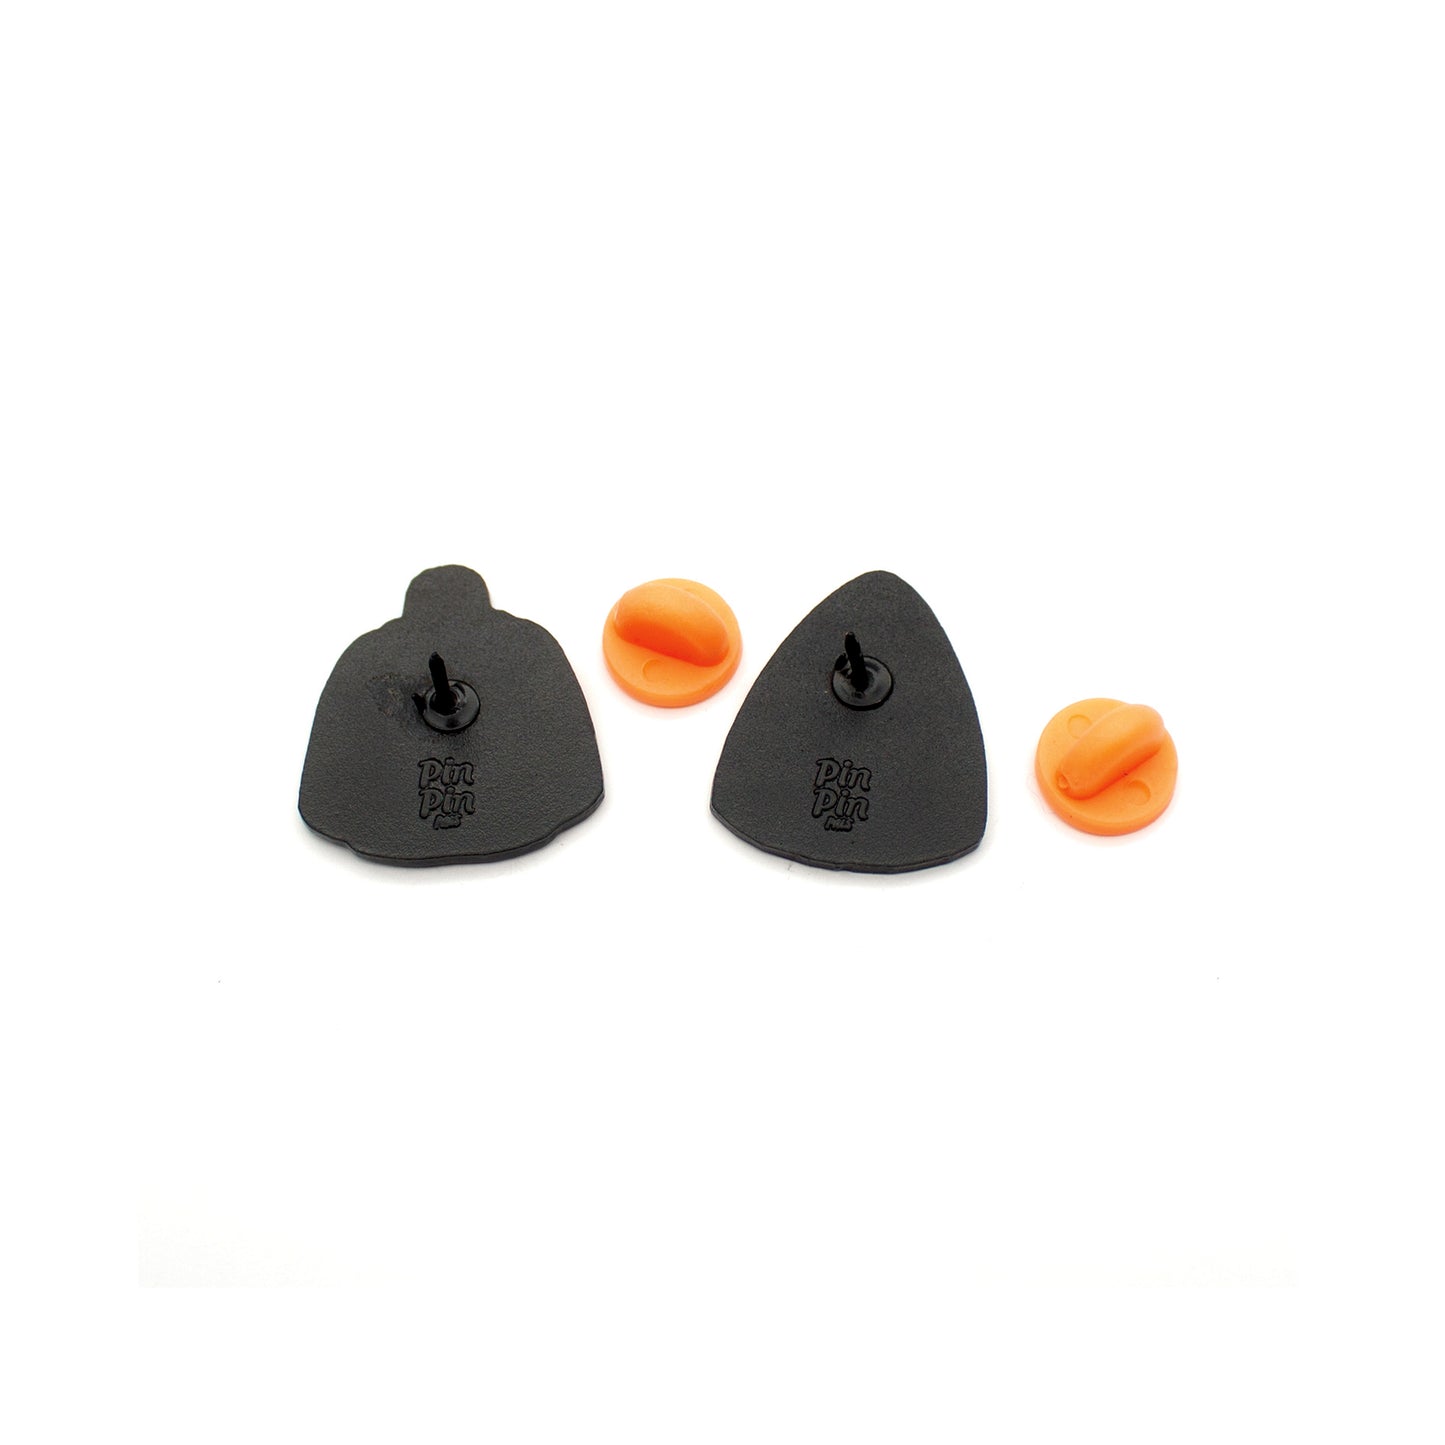 Backs of Halloween Pumpkin and Candy Corn enamel pins with orange rubber backings